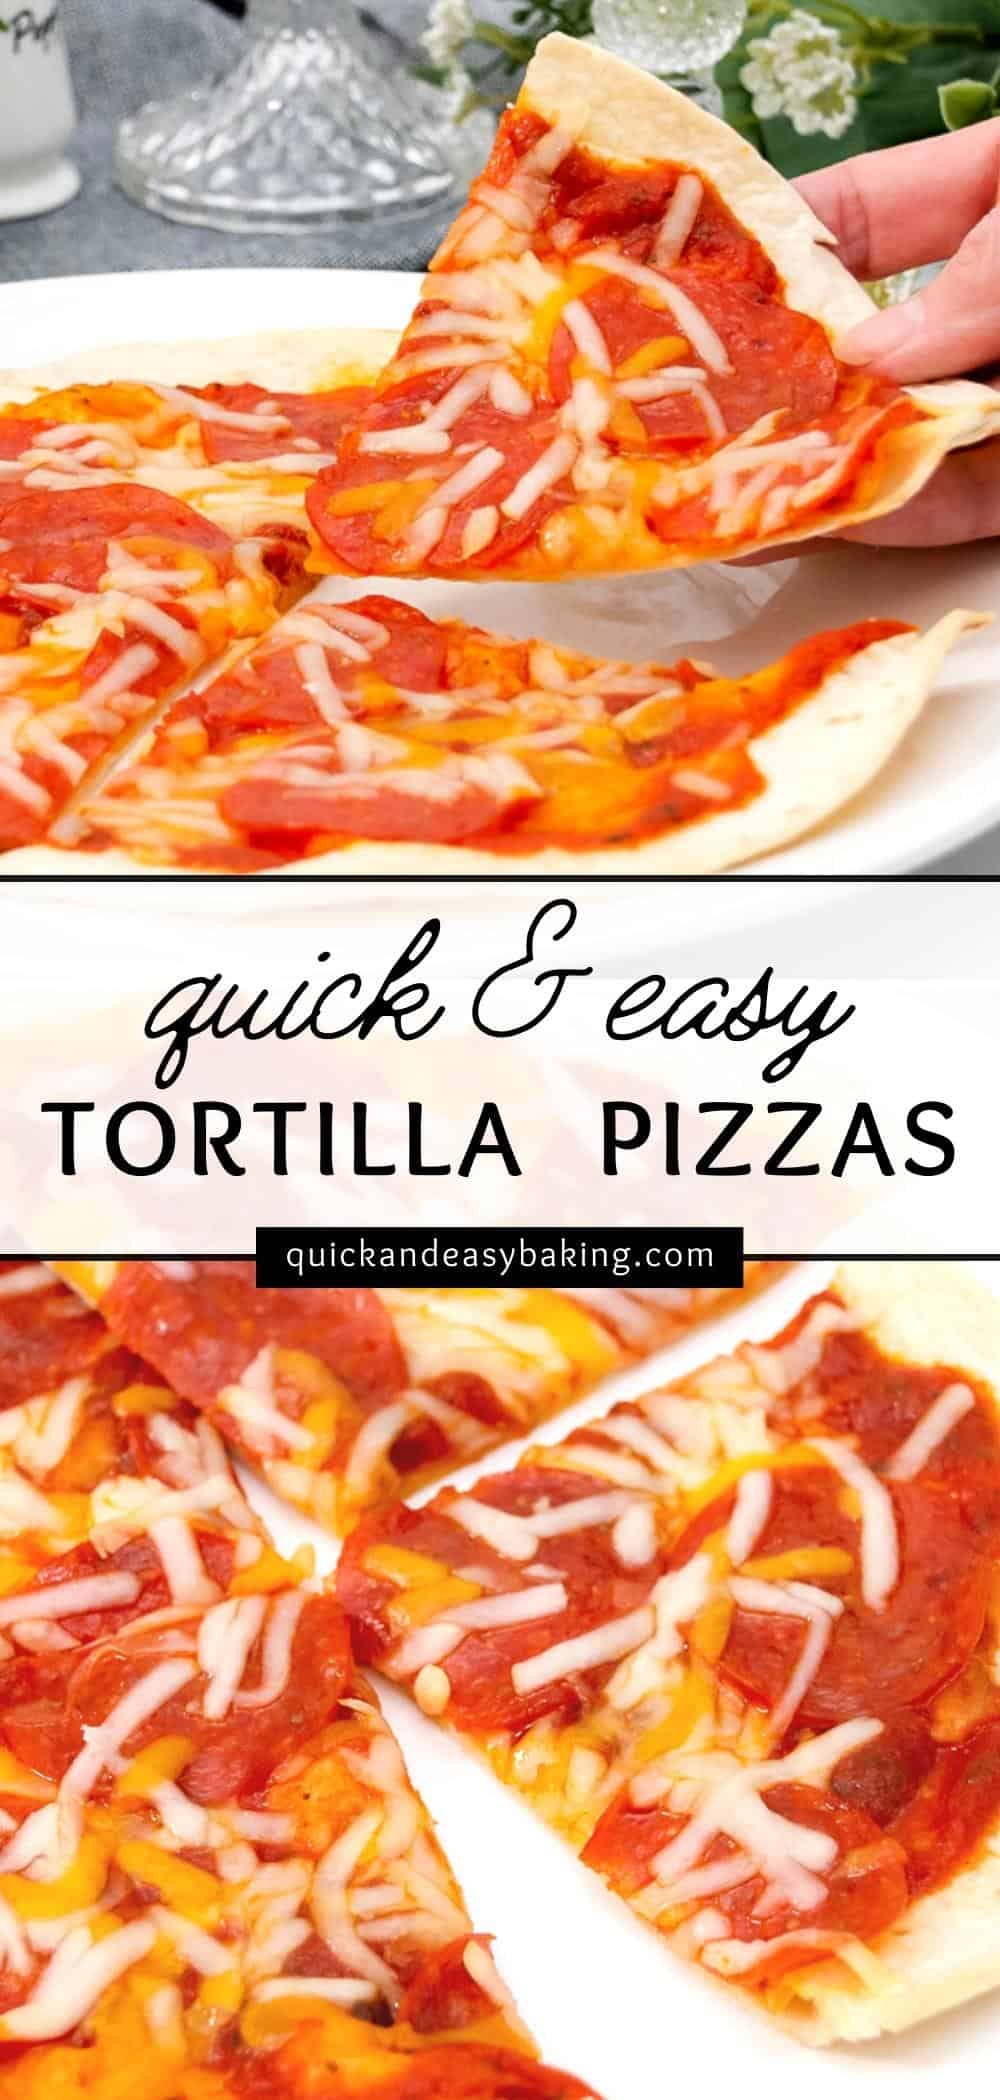 Pinterest collage image with tortilla pizza images with text overlay.